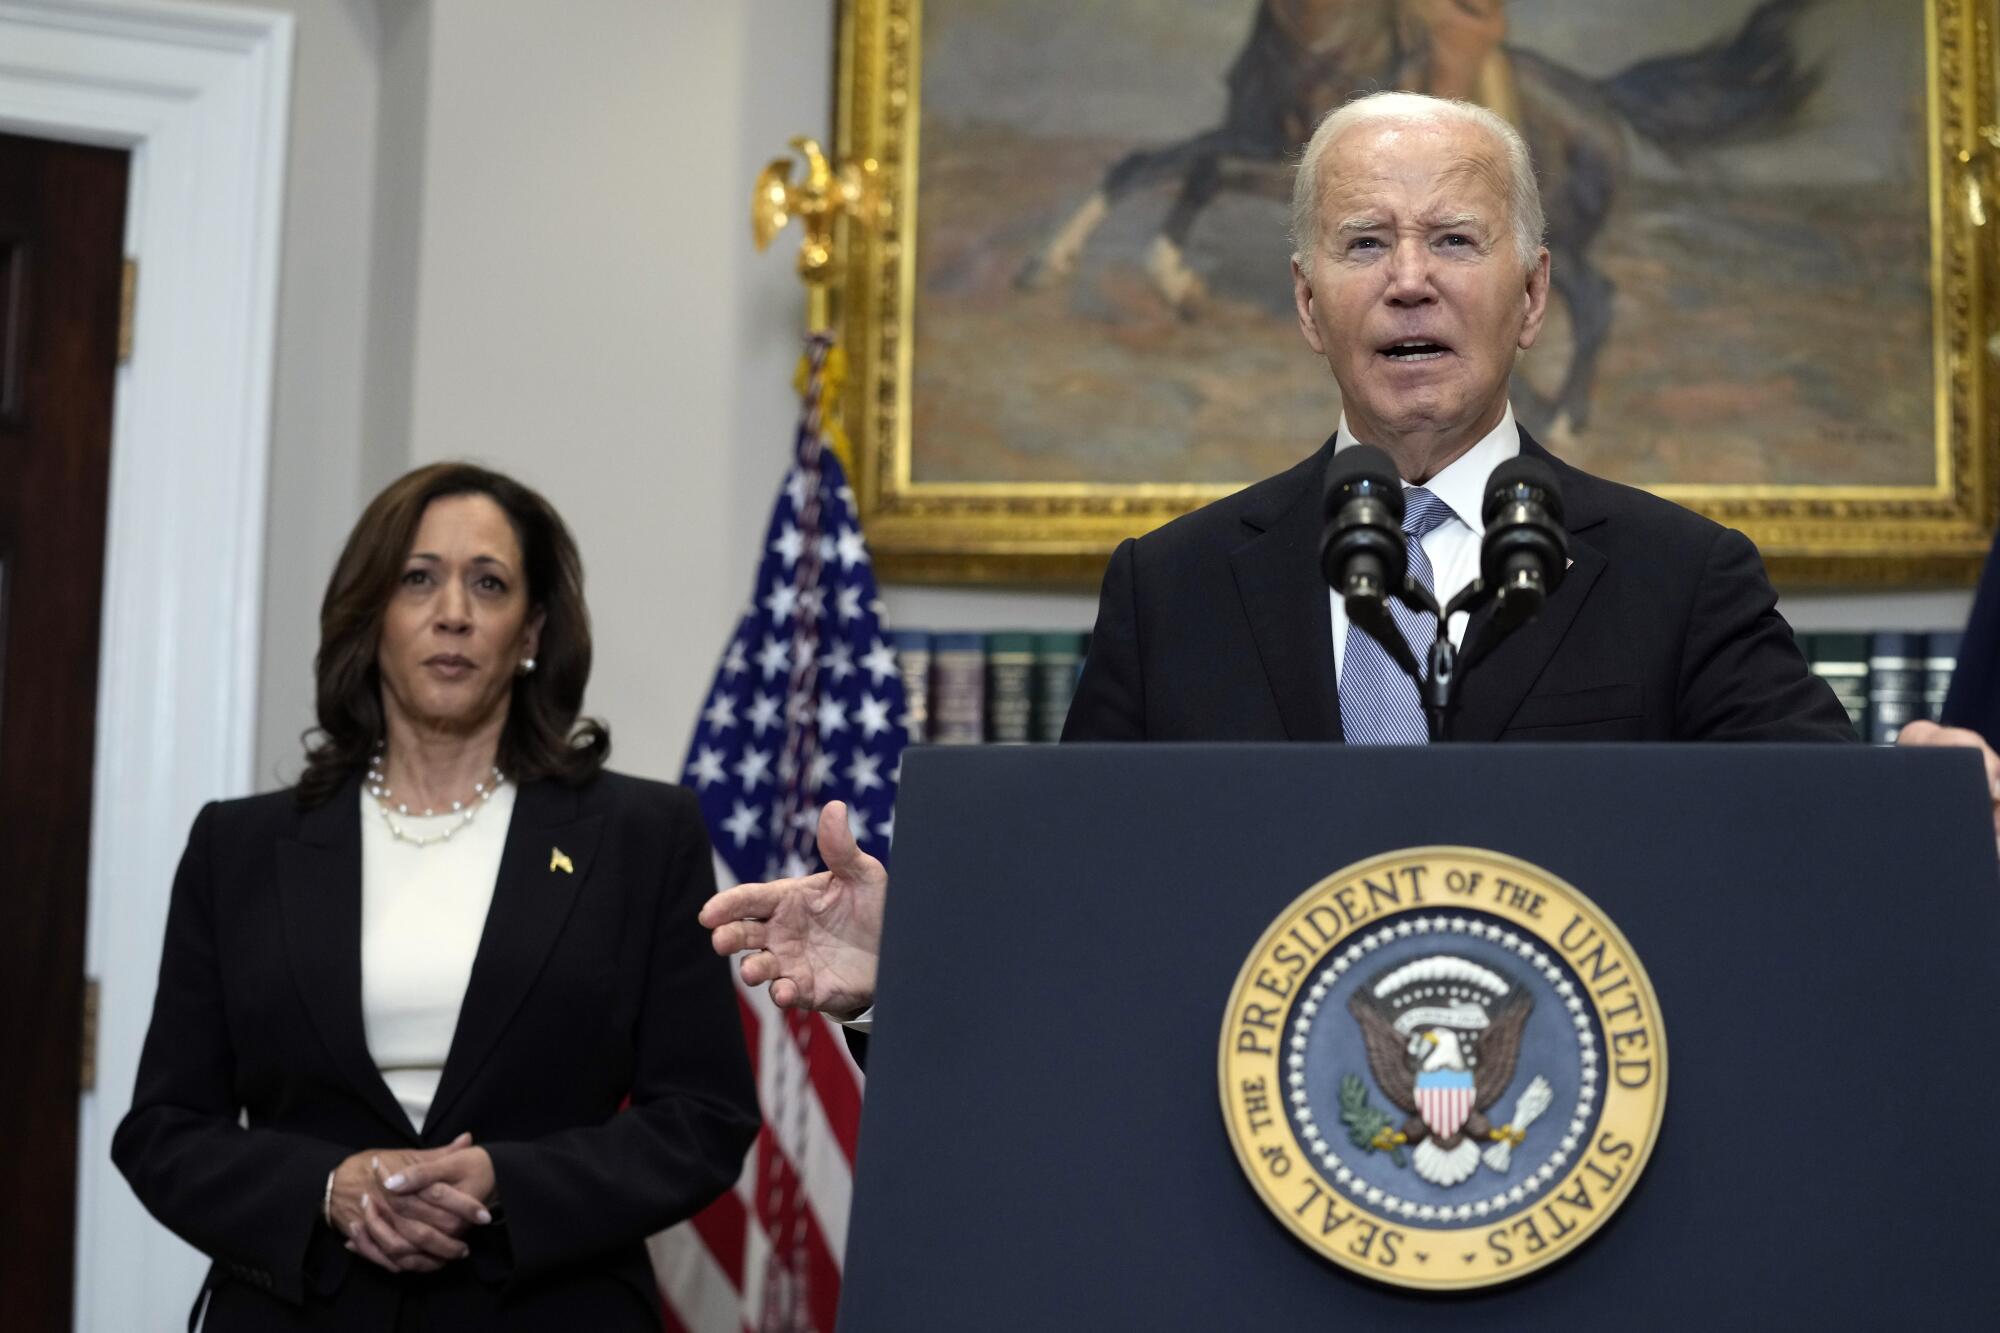 President Biden speaks from the Roosevelt Room with Kamala Harris behind and to the side of him.